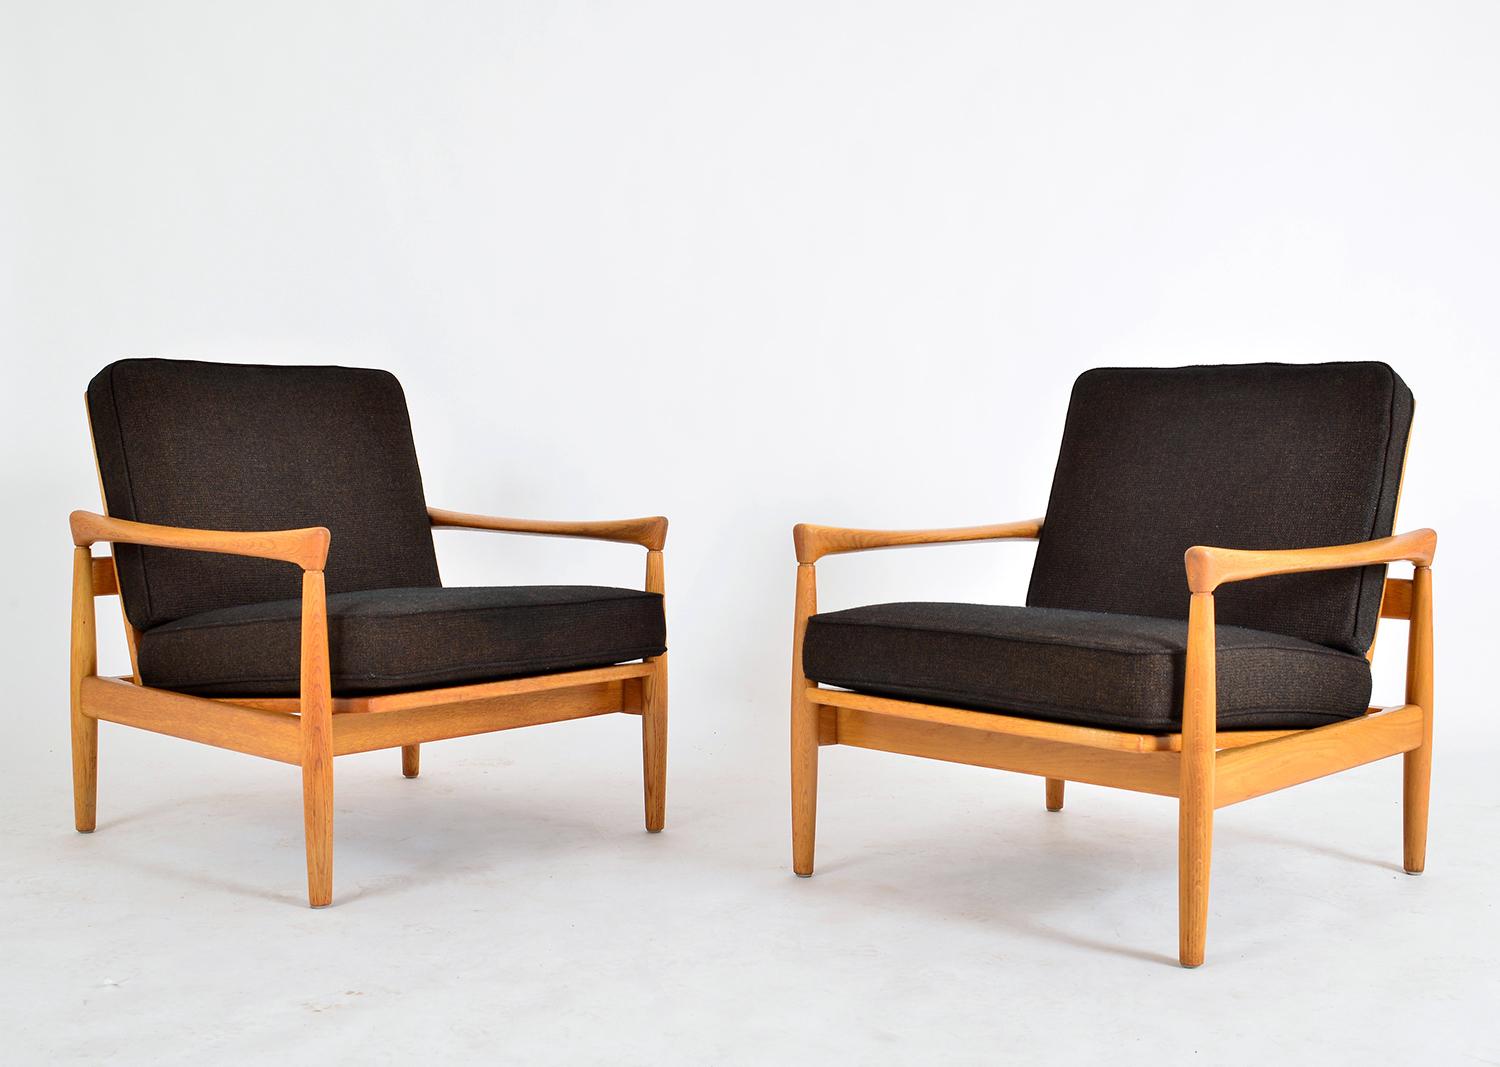 Super quality pair of early 1960s oak lounge chairs by Danish designer Erik Wortz for Bröderna Andersson. These are early examples (without screw holes), of the later flat pack ‘Kolding’ chair designed by Wortz for IKEA. The organic rich oak